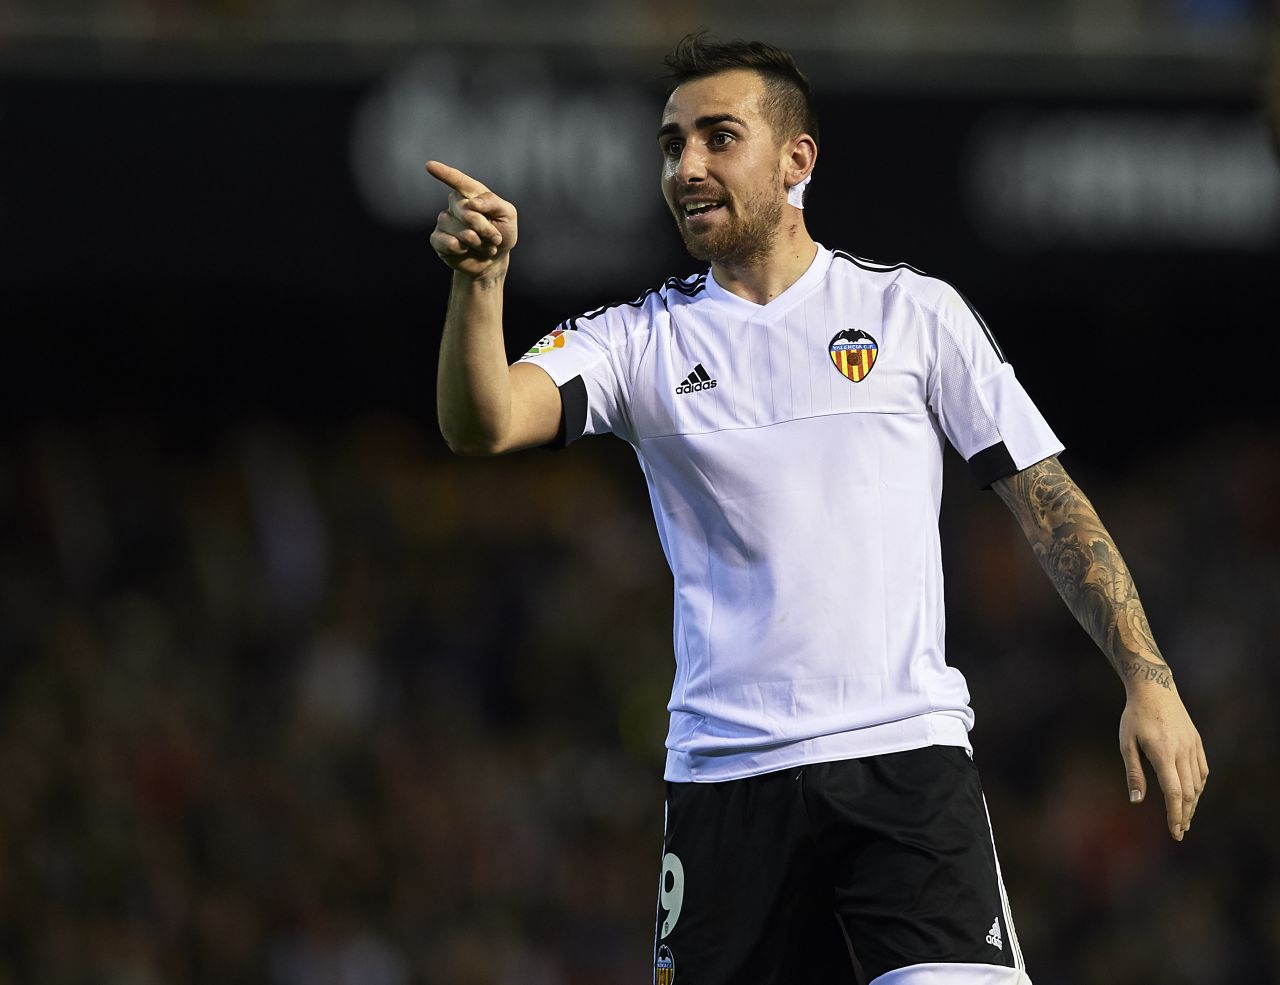 Valencia's young Spain striker Paco Alcacer also moved to the Nou Camp after Barcelona clinched a €30 million ($33.4 million) deal on August 30. The 23-year-old <a href="https://www.fcbarcelona.com/football/first-team/news/2016-2017/paco-alcacer-signs-for-fc-barcelona" target="_blank" target="_blank">has a buyout clause of €100 million ($111.4 million)</a>.